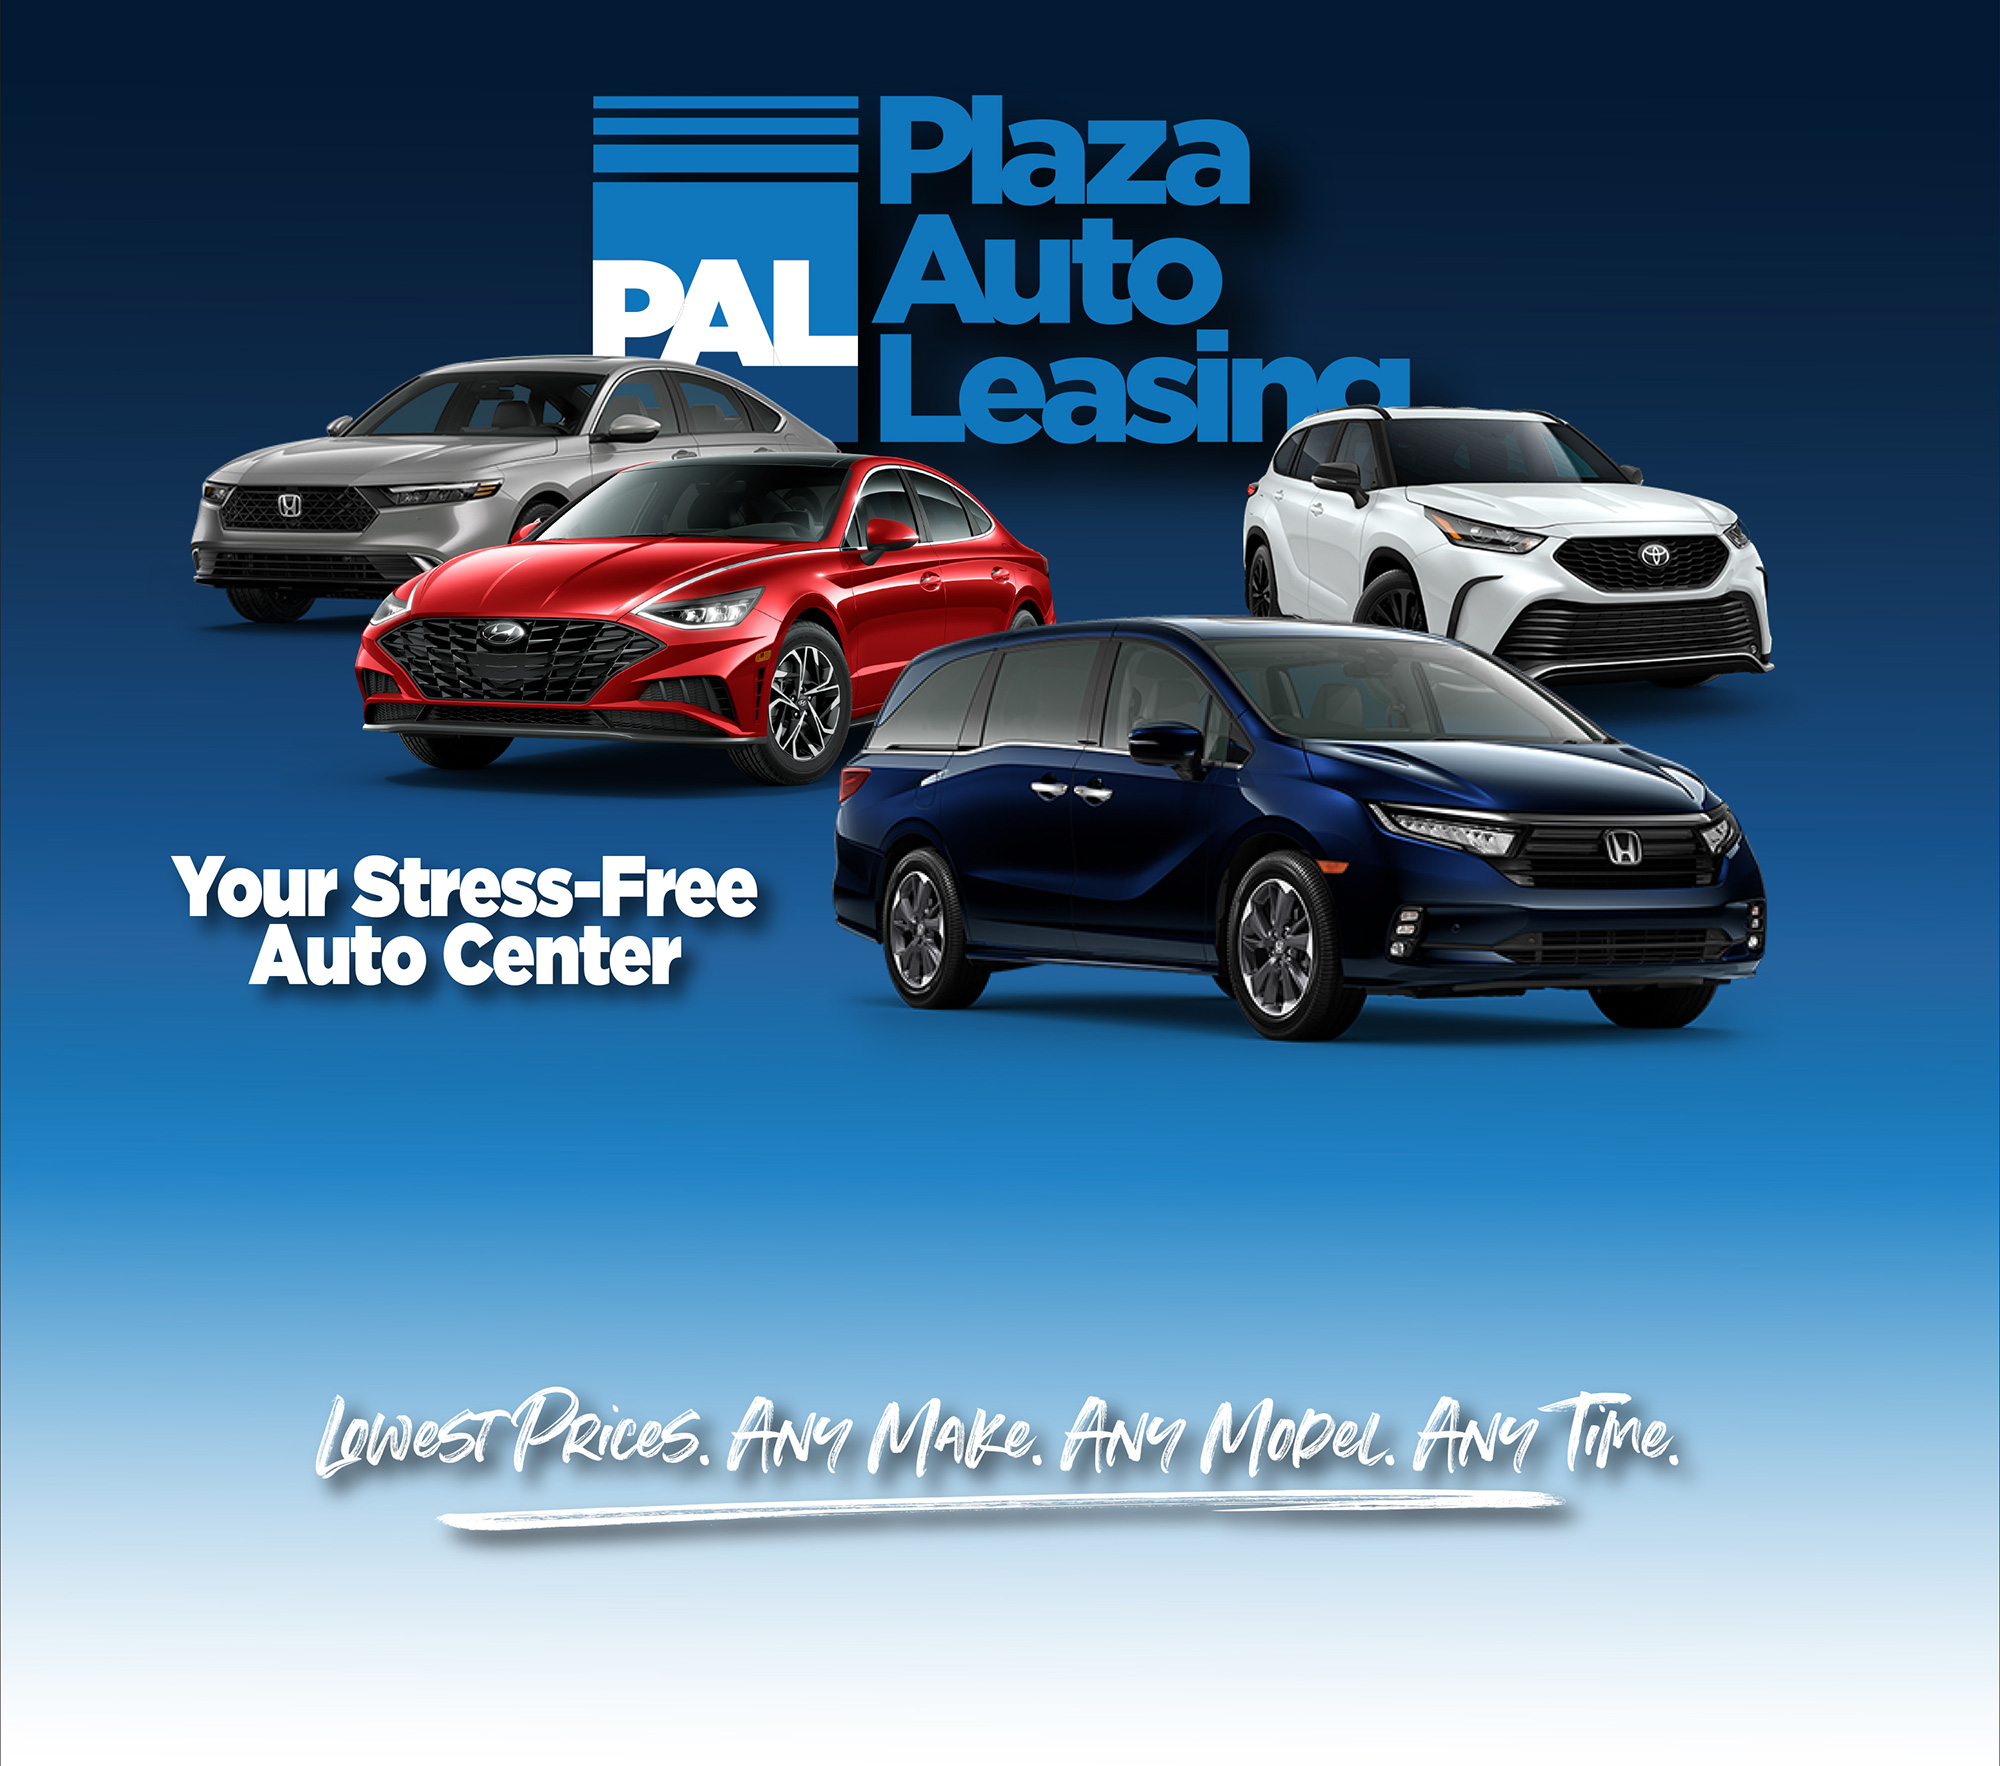 Occasion Auto Leasing Promotion